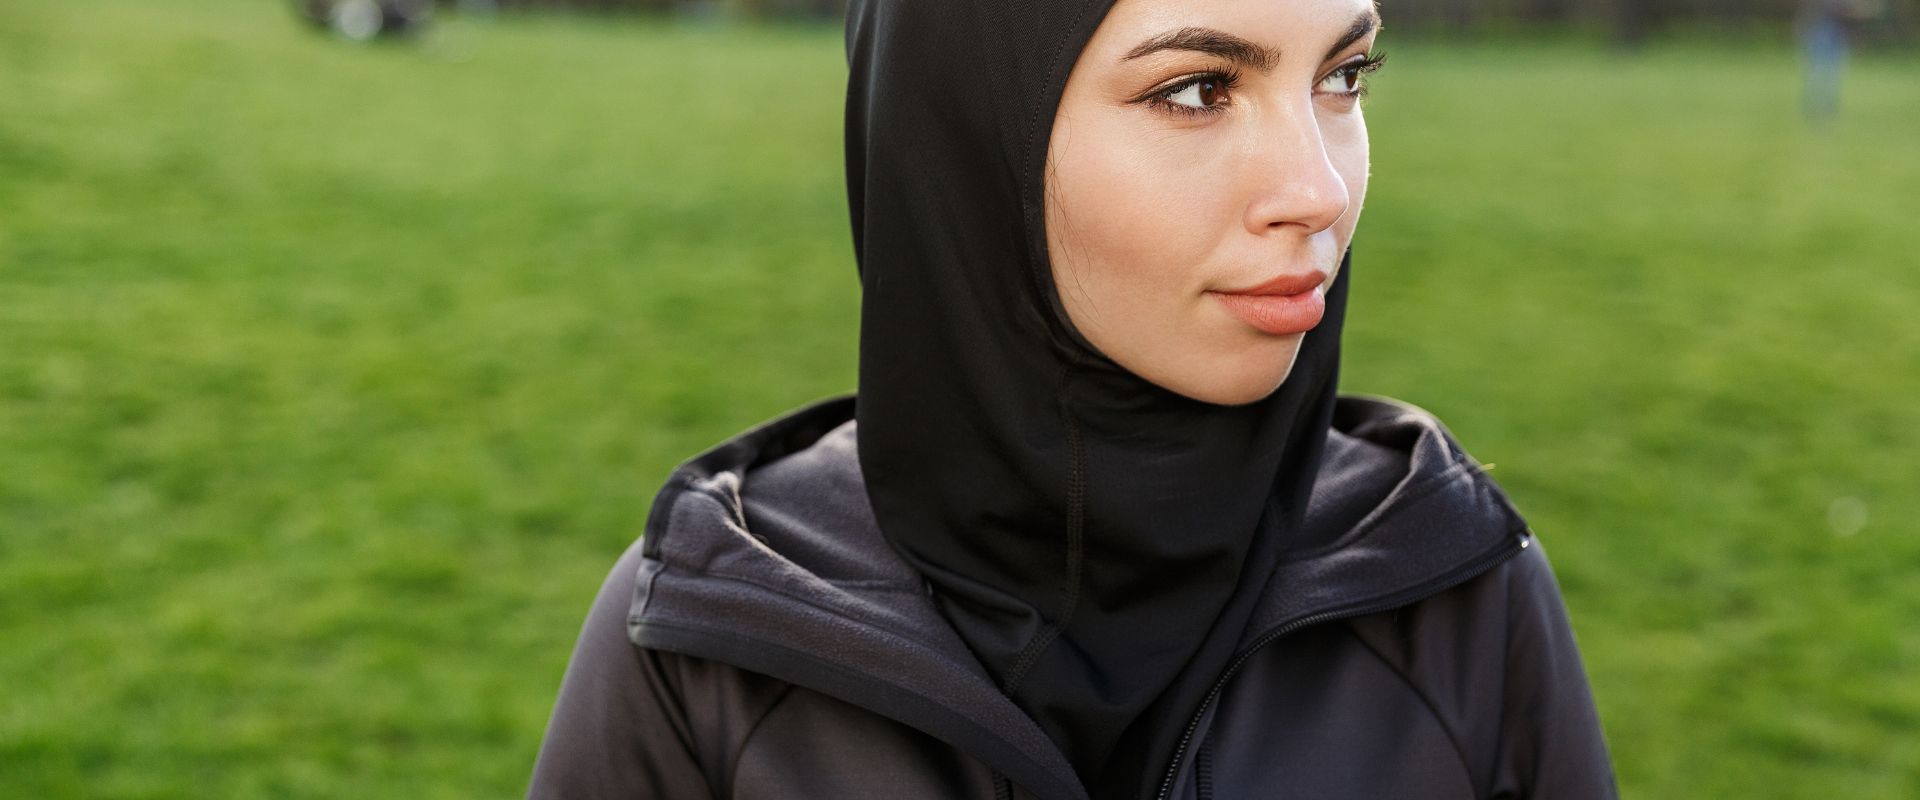 A woman goes for a run in a field with a black fitness hoodie on.